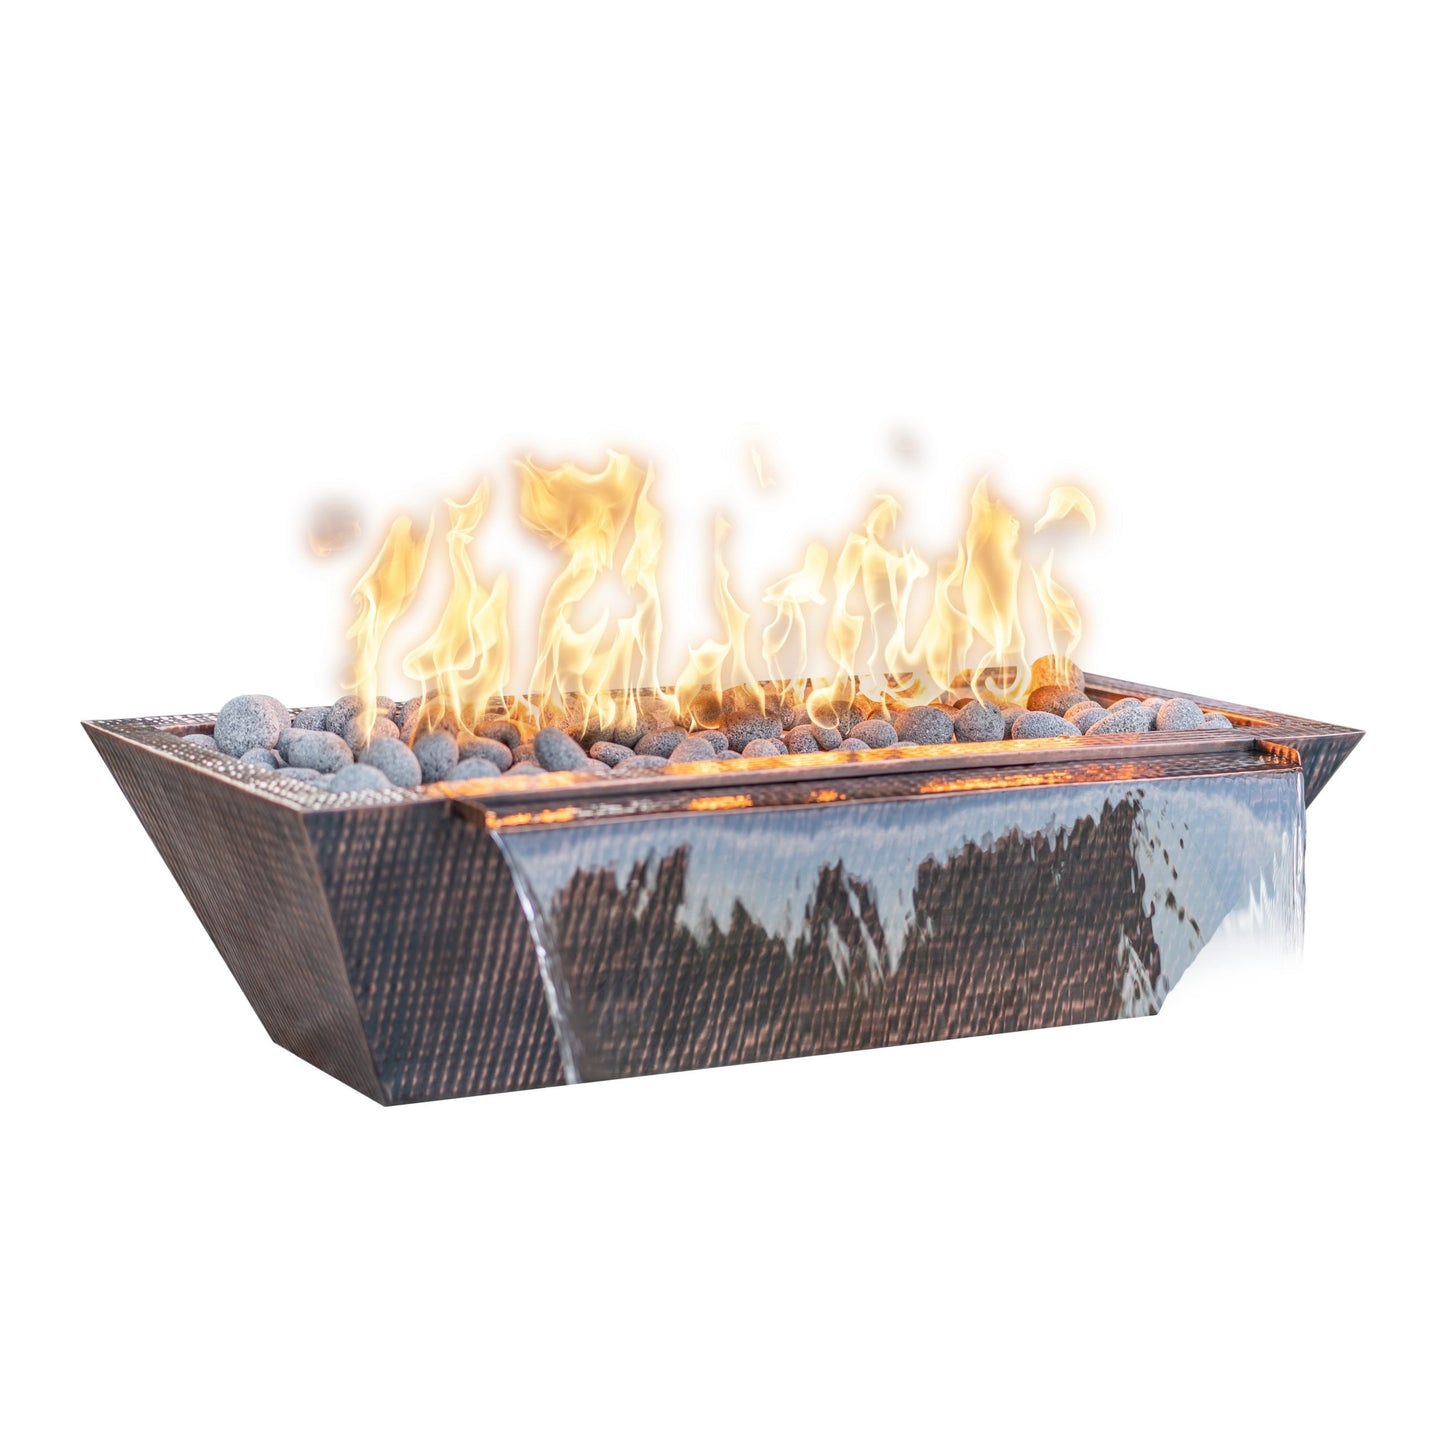 The Outdoor Plus Linear Maya 60" Hammered Copper Liquid Propane Fire & Water Bowl with Match Lit with Flame Sense Ignition